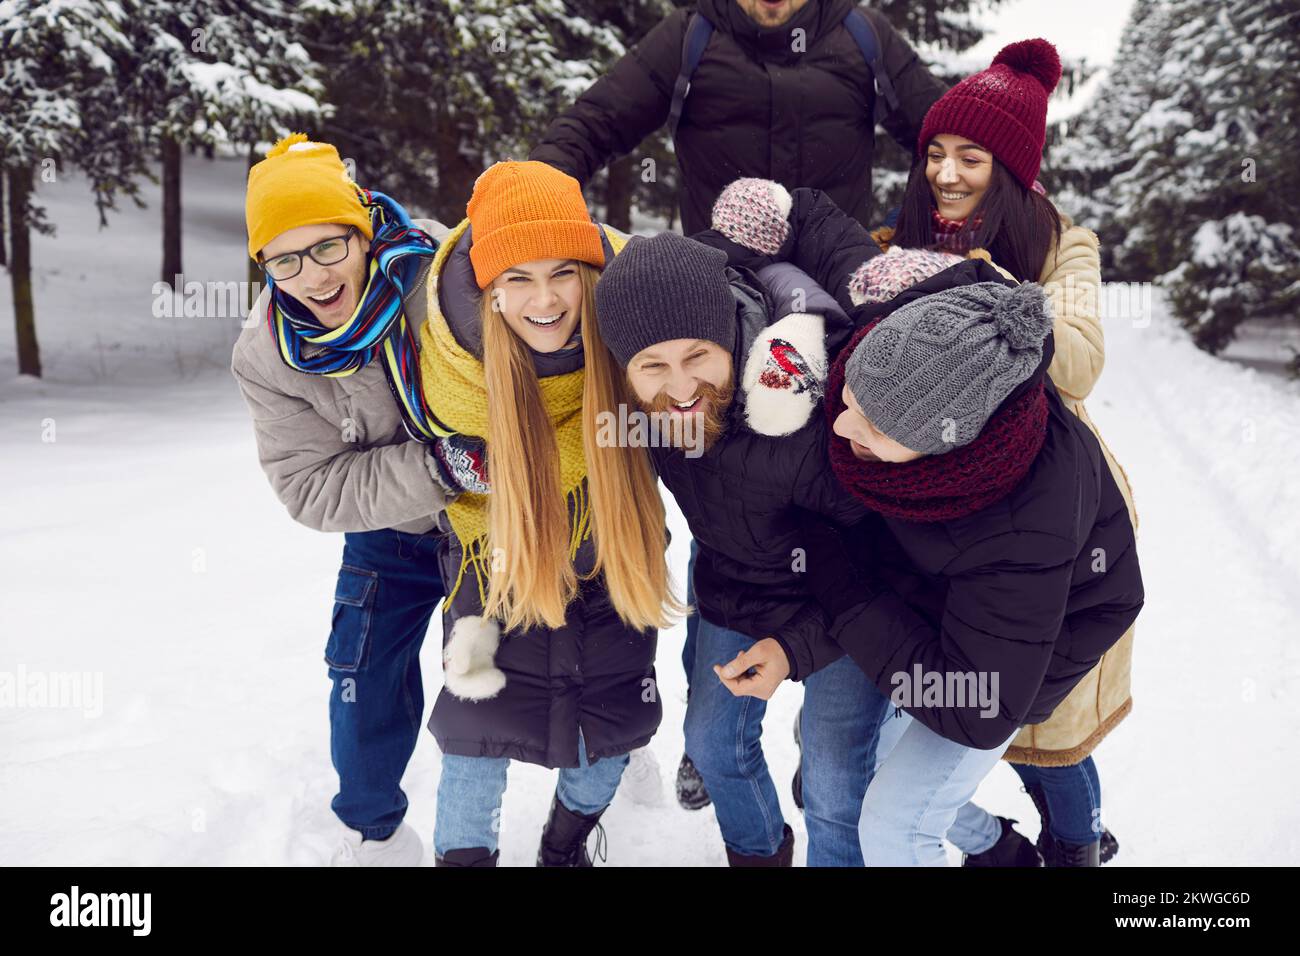 Smiling friends have fun enjoy walk in snowy forest Stock Photo